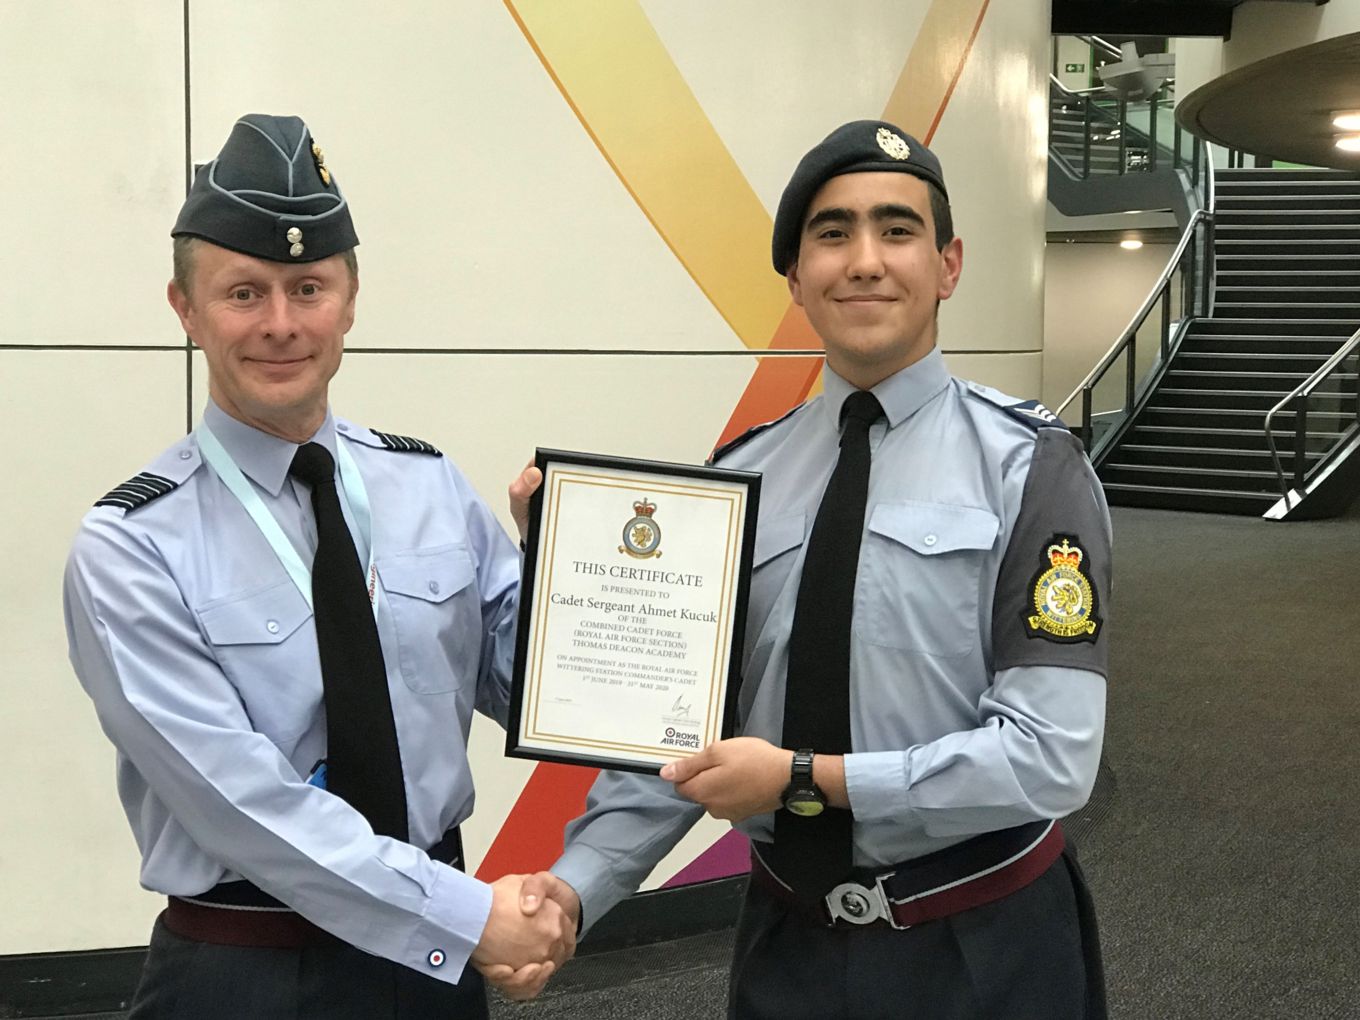 Group Captain Tony Keeling presents Cadet Sergeant Ahmet Kucuk with his certificate